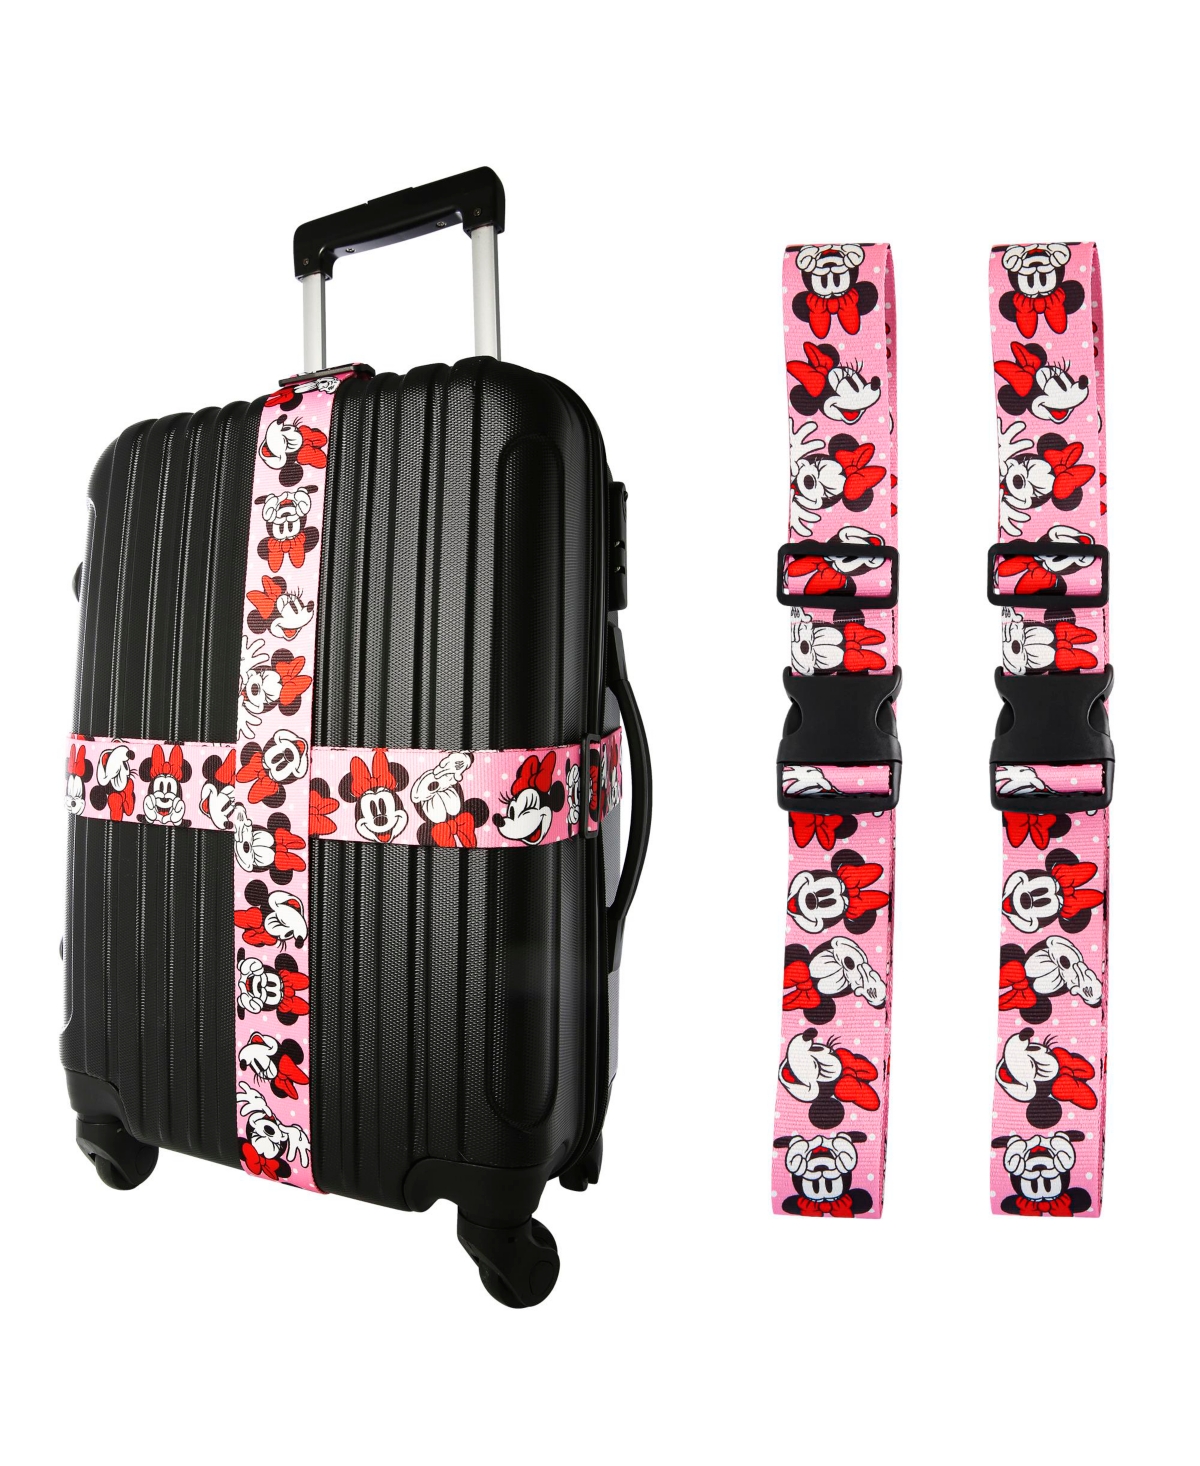 Minnie Mouse Luggage Strap 2-Piece Set Officially Licensed, Adjustable Luggage Straps from 30'' to 72'' - Pink, red